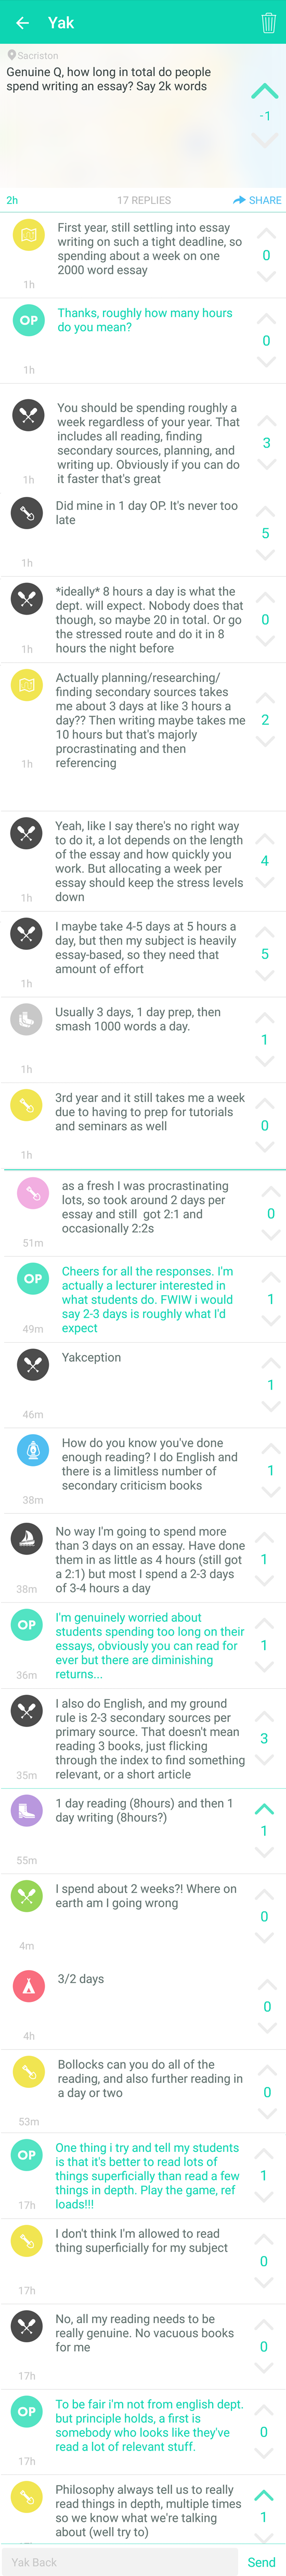 Screenshot from Yik Yak conversation about time spent on essays